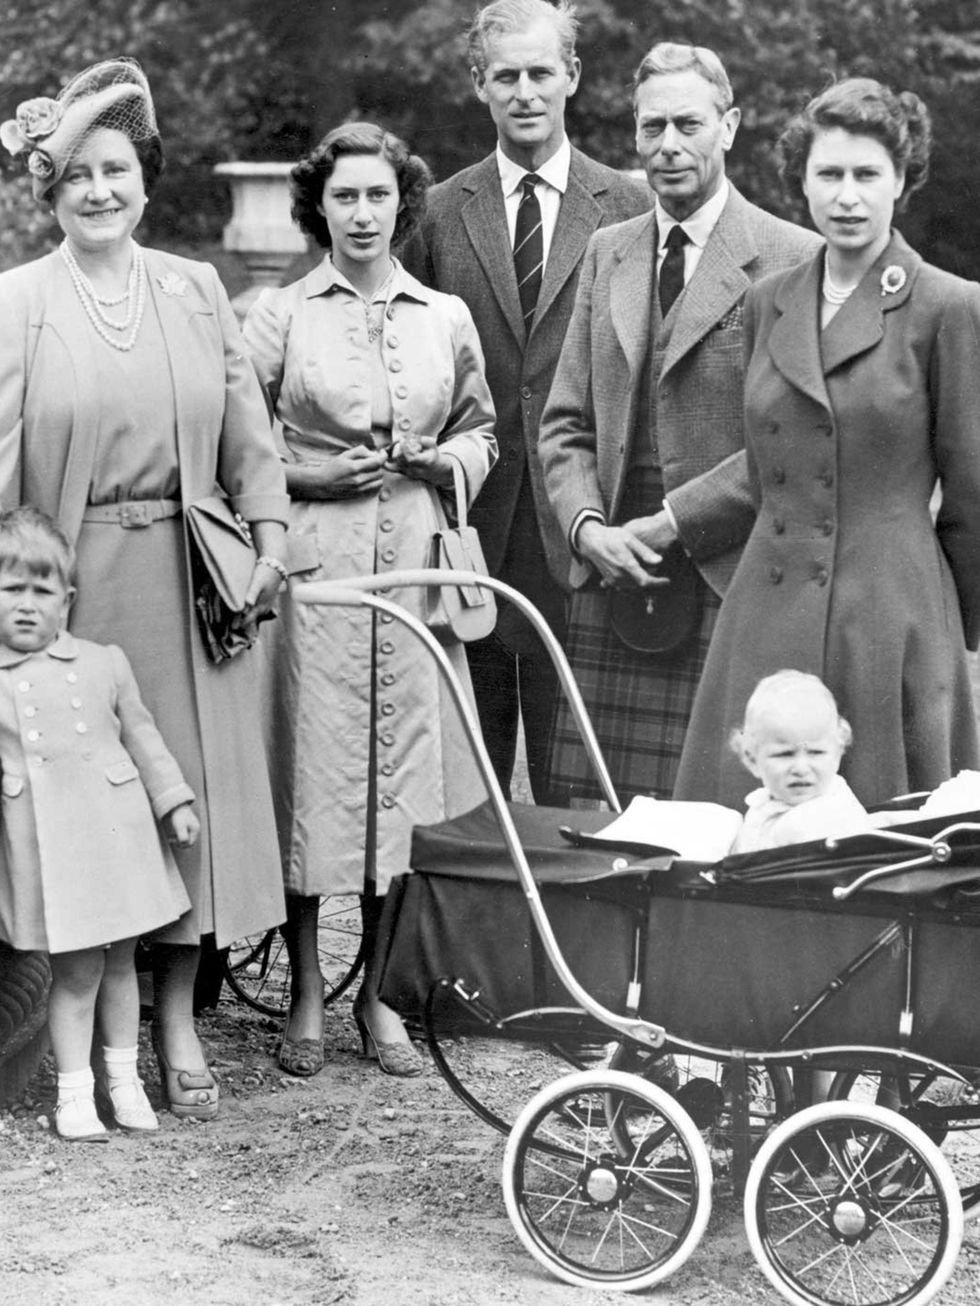 <p>Government officials used to be required to attend the births of a royal babies to make sure the child wasnt switched. Thankfully, this was abolished by George VI.</p><p><em>The Royal family in 1951: (l-r) <a href="http://www.elleuk.com/star-style/cel